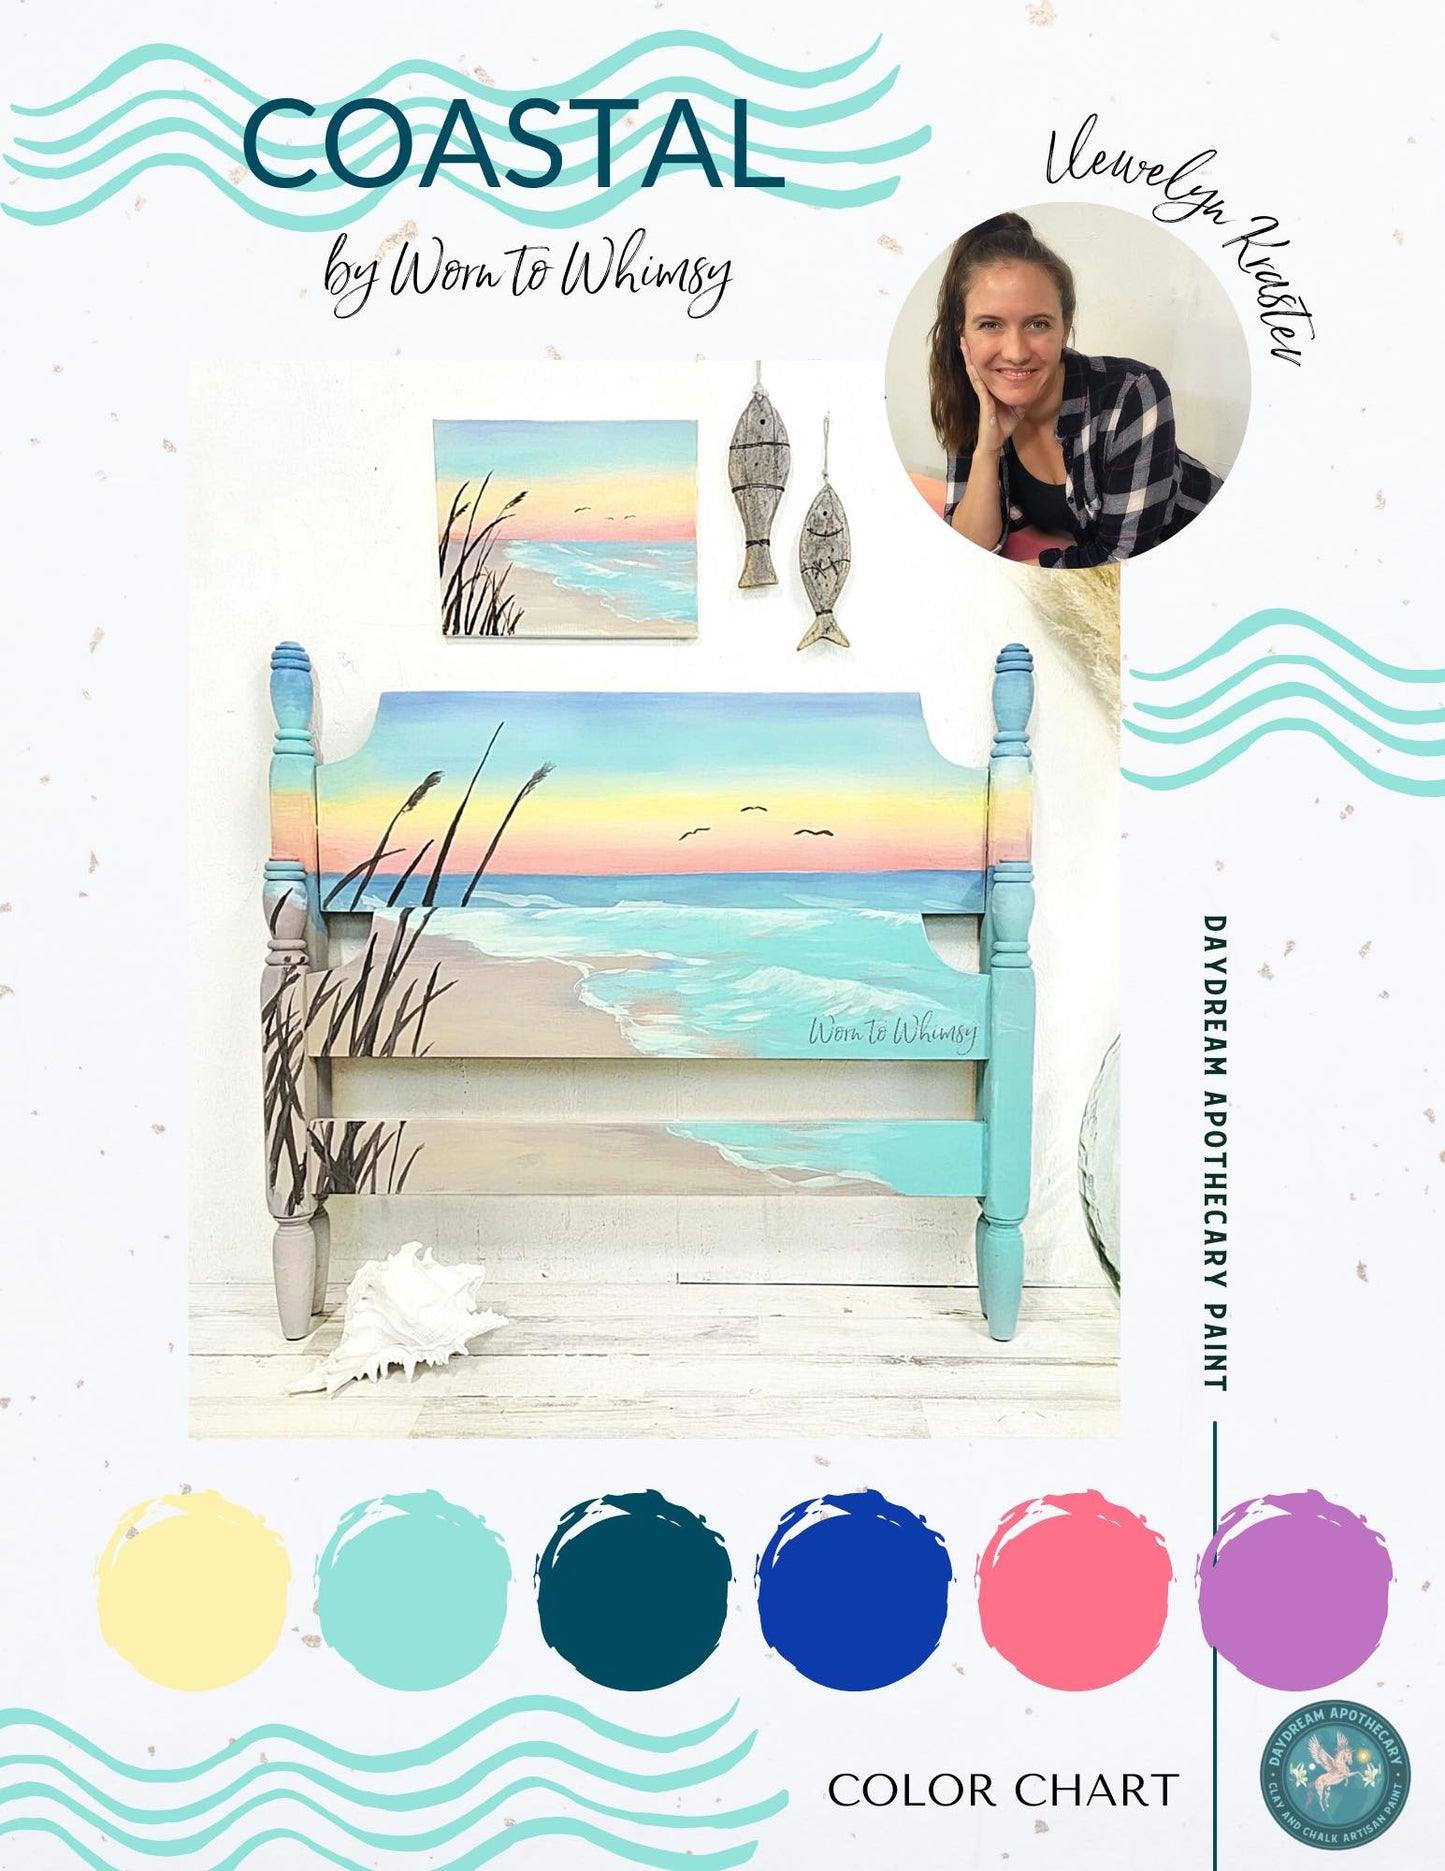 CLOSEOUT SALE! Sea La Vie🌊 COASTAL by Worn to Whimsy | Daydream Apothecary Clay and Chalk Artisan Paint